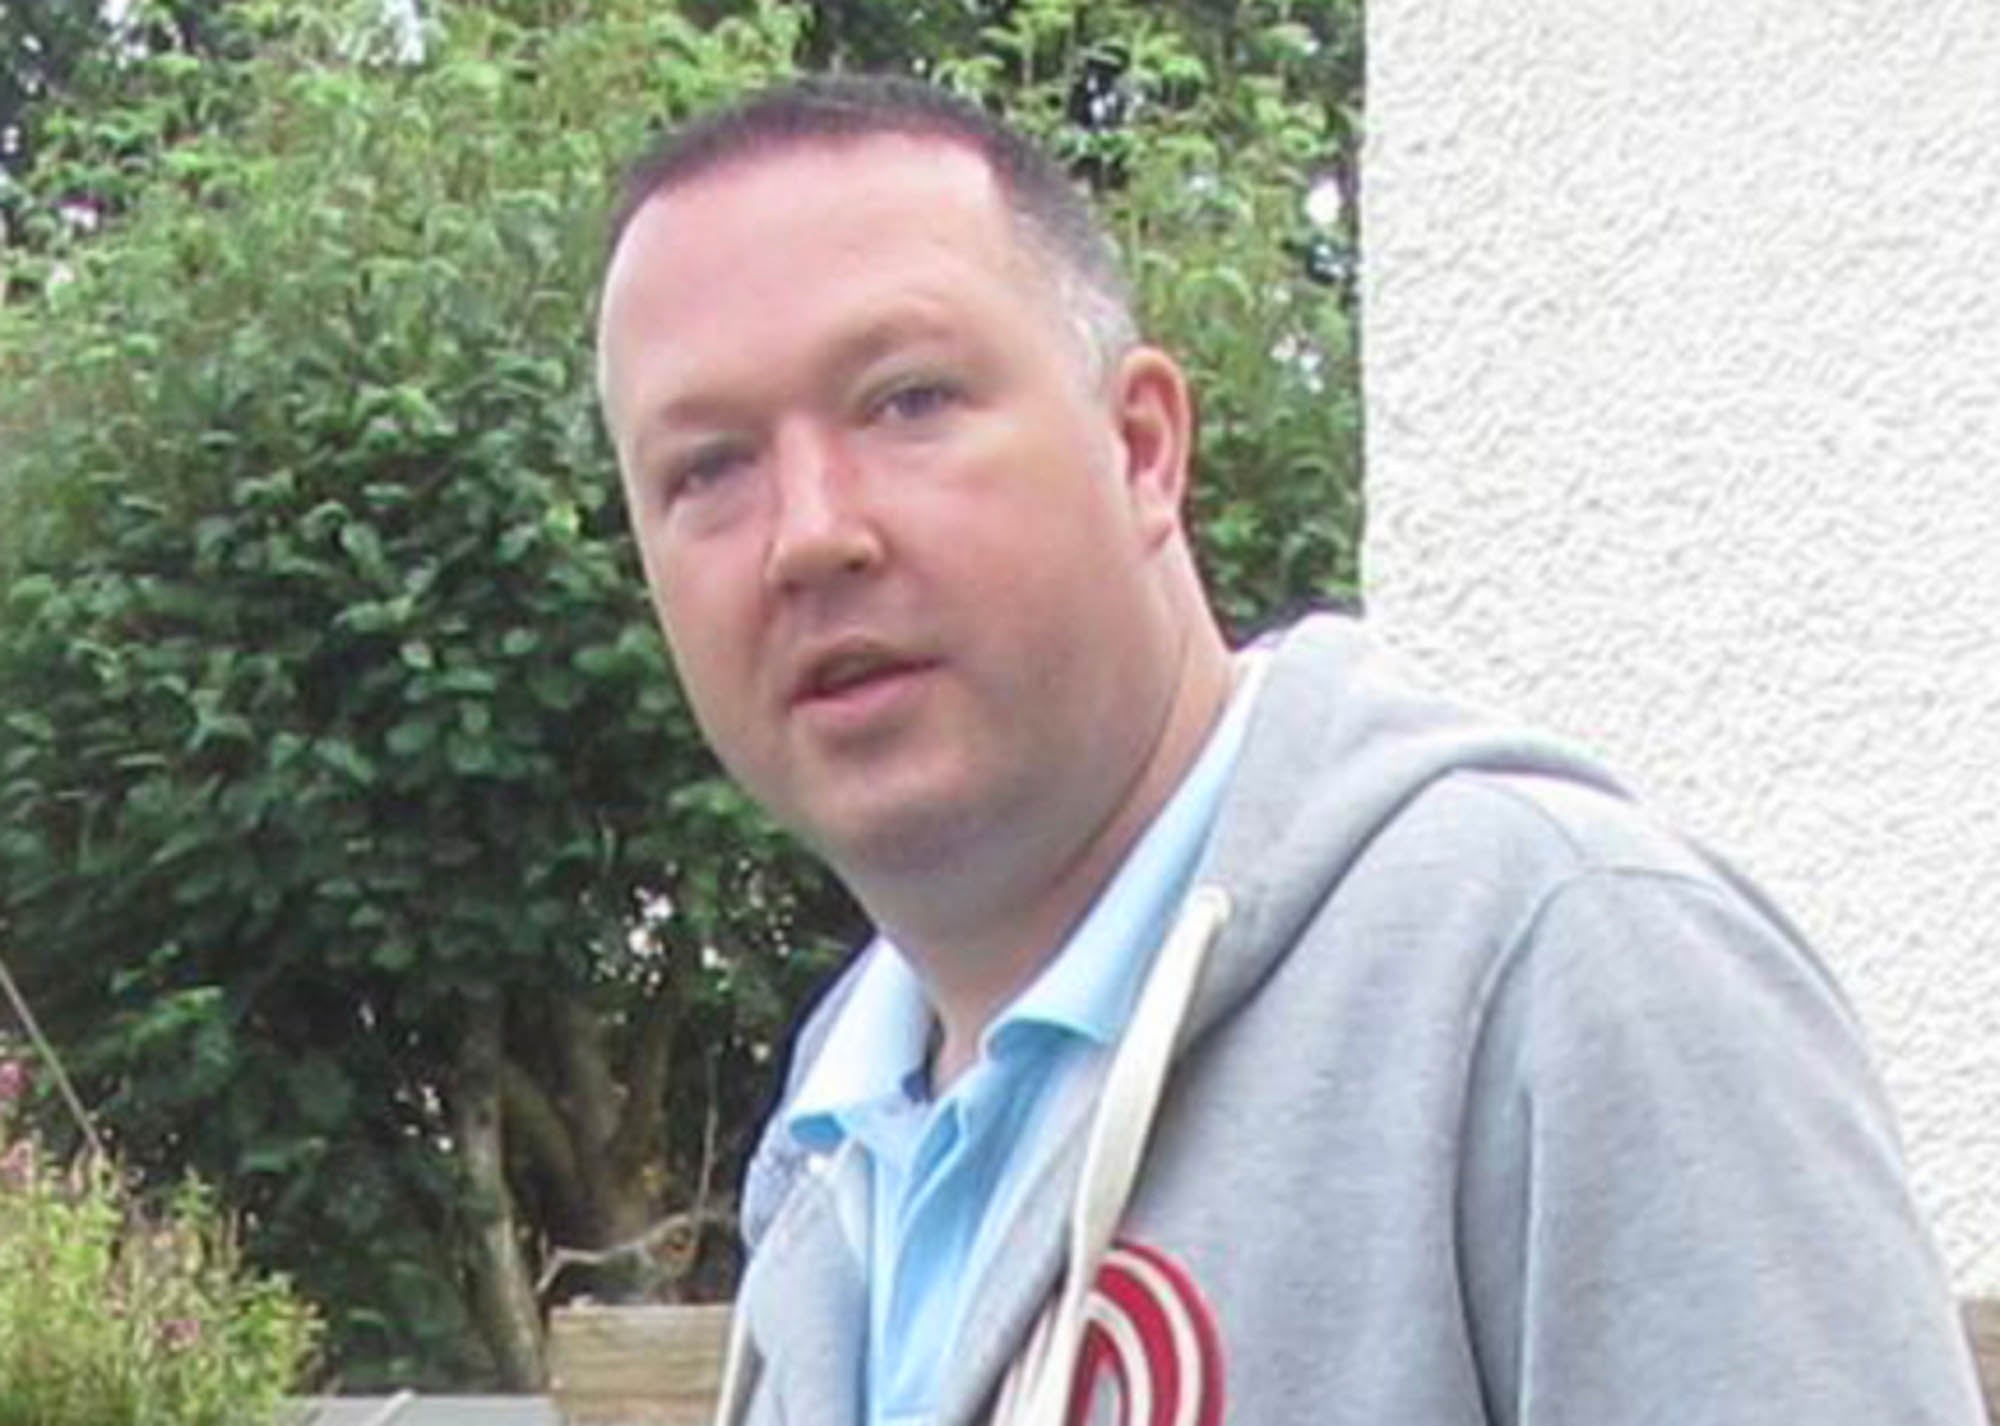 John Dalziel died after a house fire at his home in Paisley in May 2020 (Police Scotland/PA)